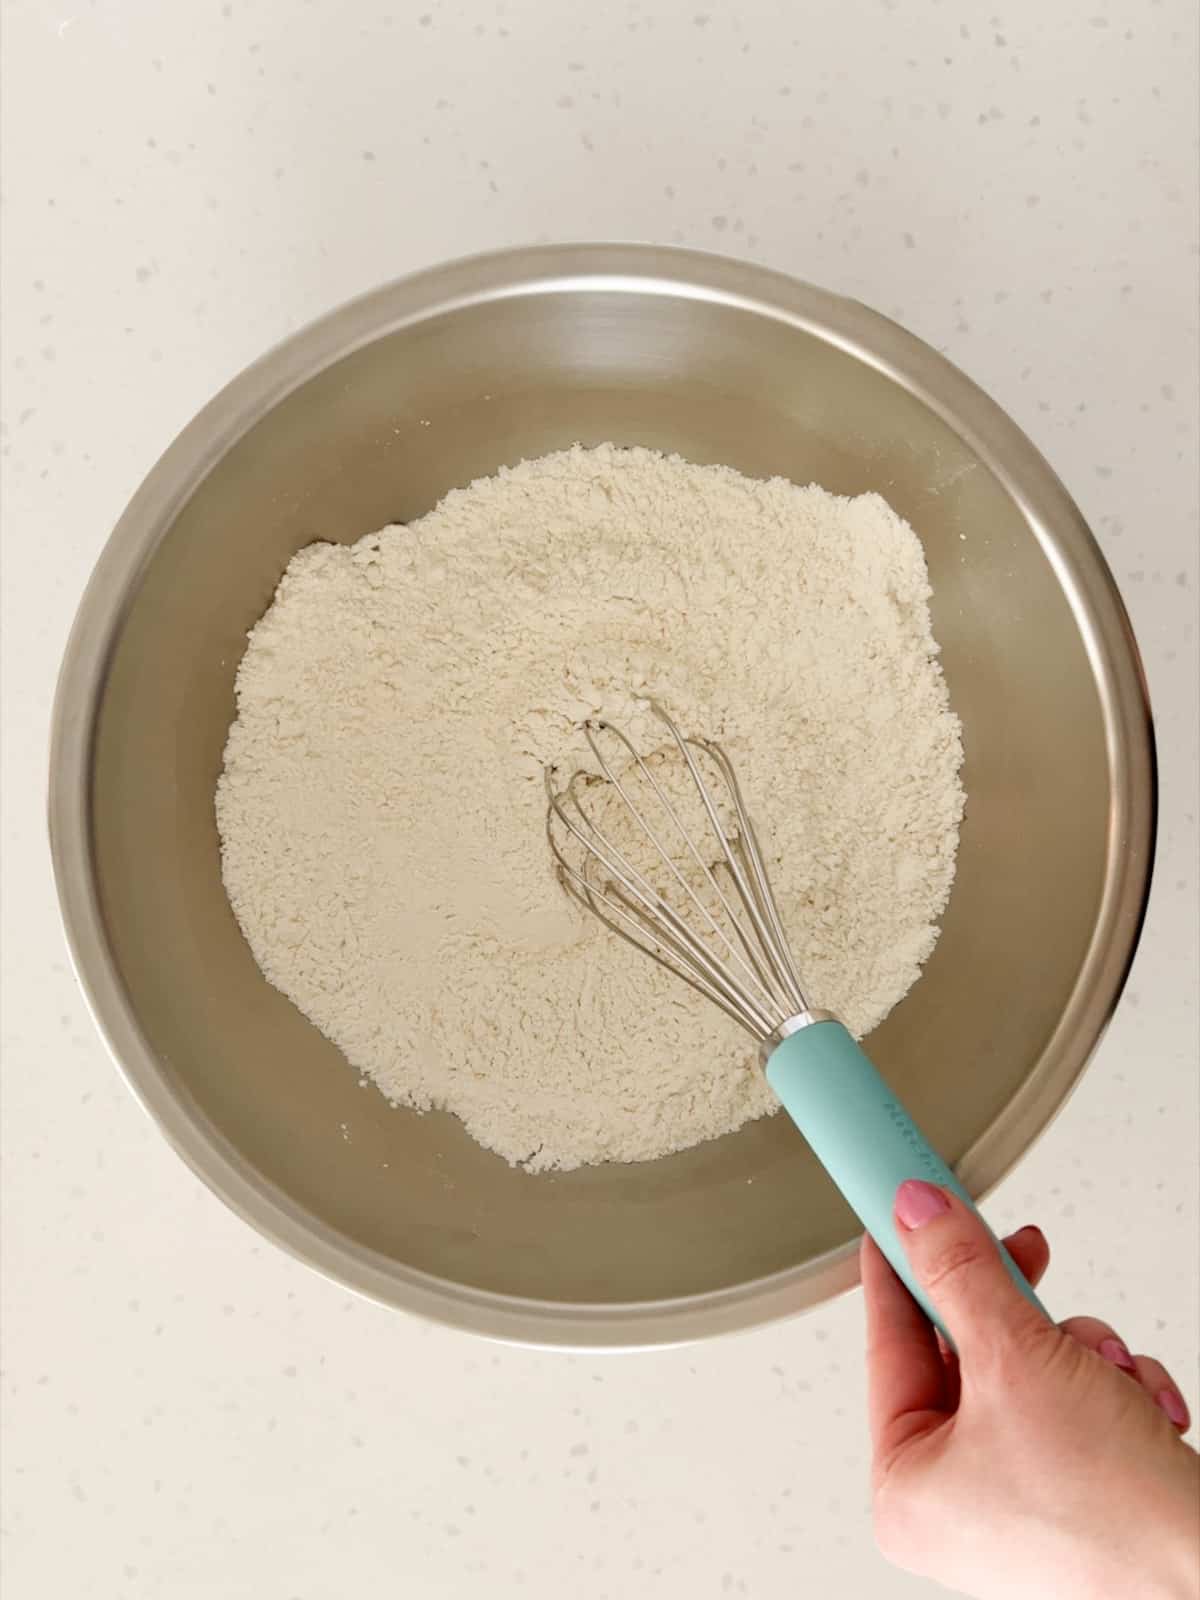 Flour, baking powder, and salt are whisked together in a bowl.